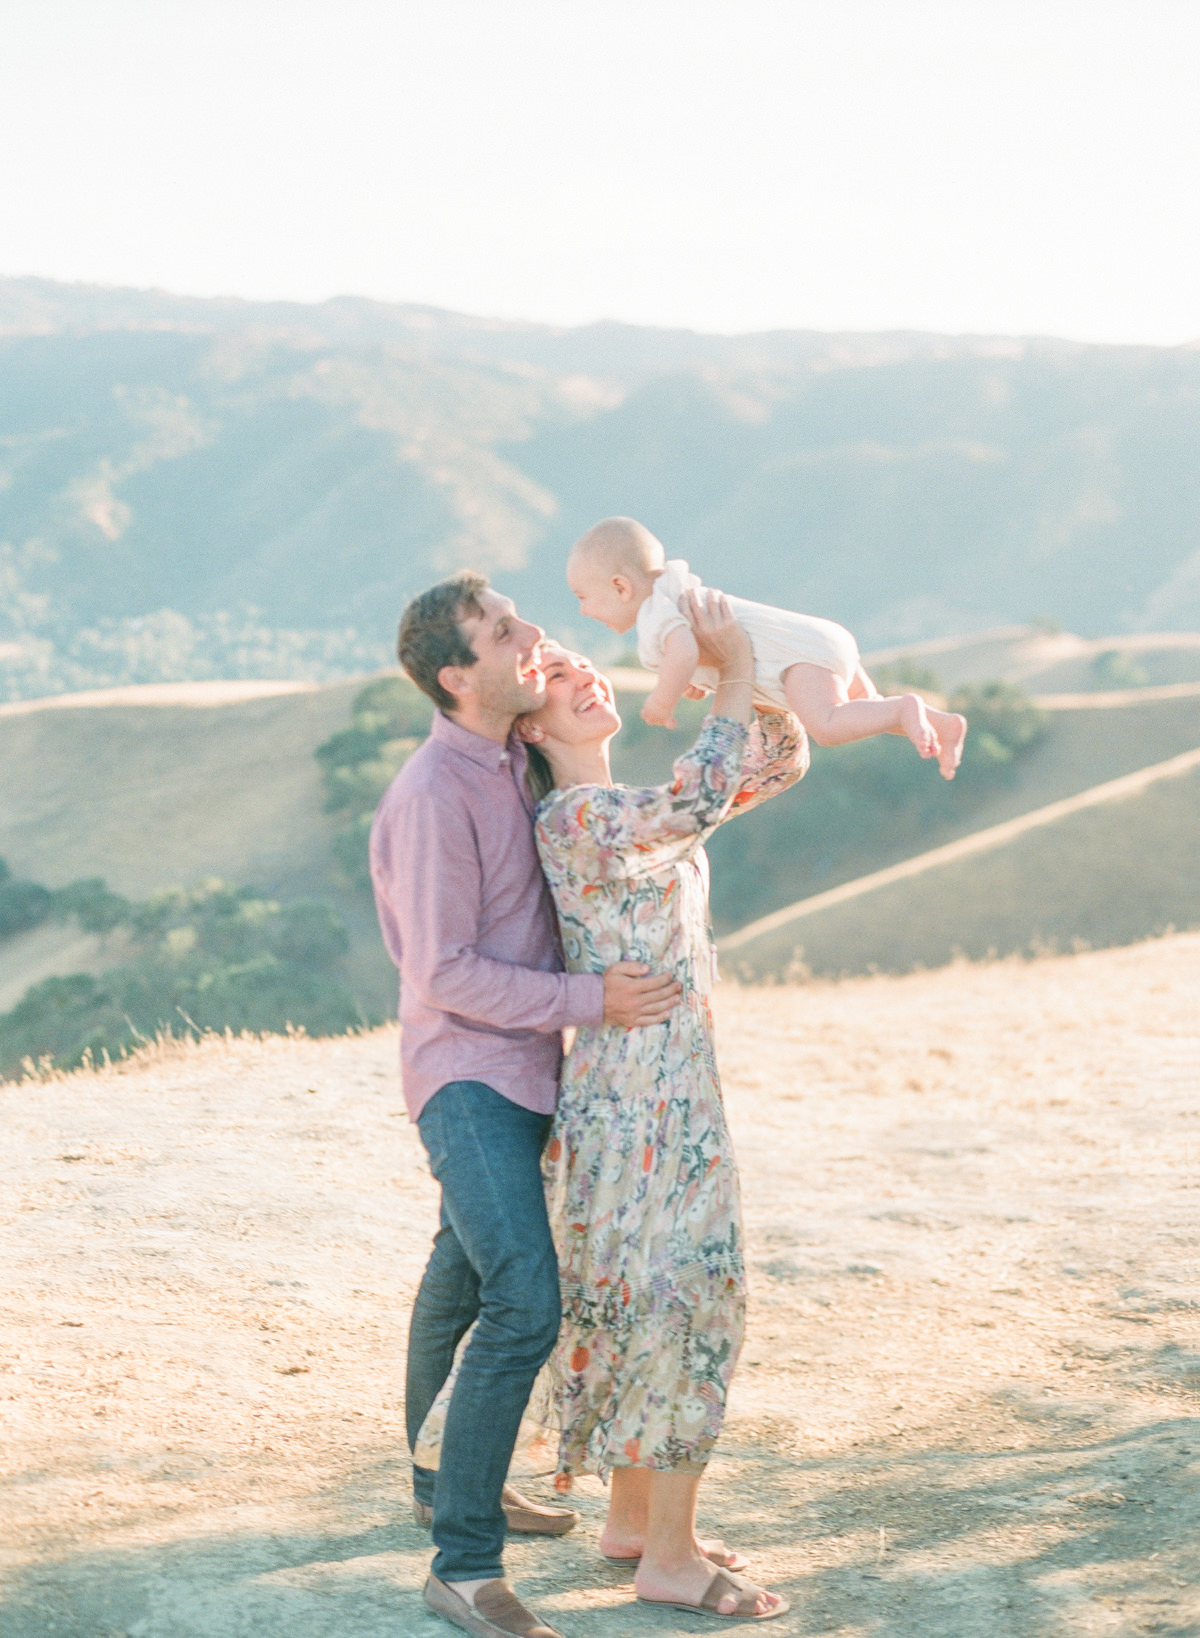 Bay Area Firstborn Love, Top San Francisco Bay Area Newborn Photography on Film, Family Session on Film,  San Francisco Bay Area Newborn Photography, San Francisco Bay Area Newborn Photographer,  San Francisco Bay Area Family Photography on Film, Families on Film, Film Photography, What to Wear for Family Photography Session, Family Session, Family Photos Film Photography, Film Family Photography Fine Art, Family Photography on Film, Fine Art Family Photography, Charlotte Family Photographer, Charlotte Family Photographer, Charlotte Family Film Photographer, Kent Avenue Photography, Light and Airy Family Photography, www.kentavenuephotography.com